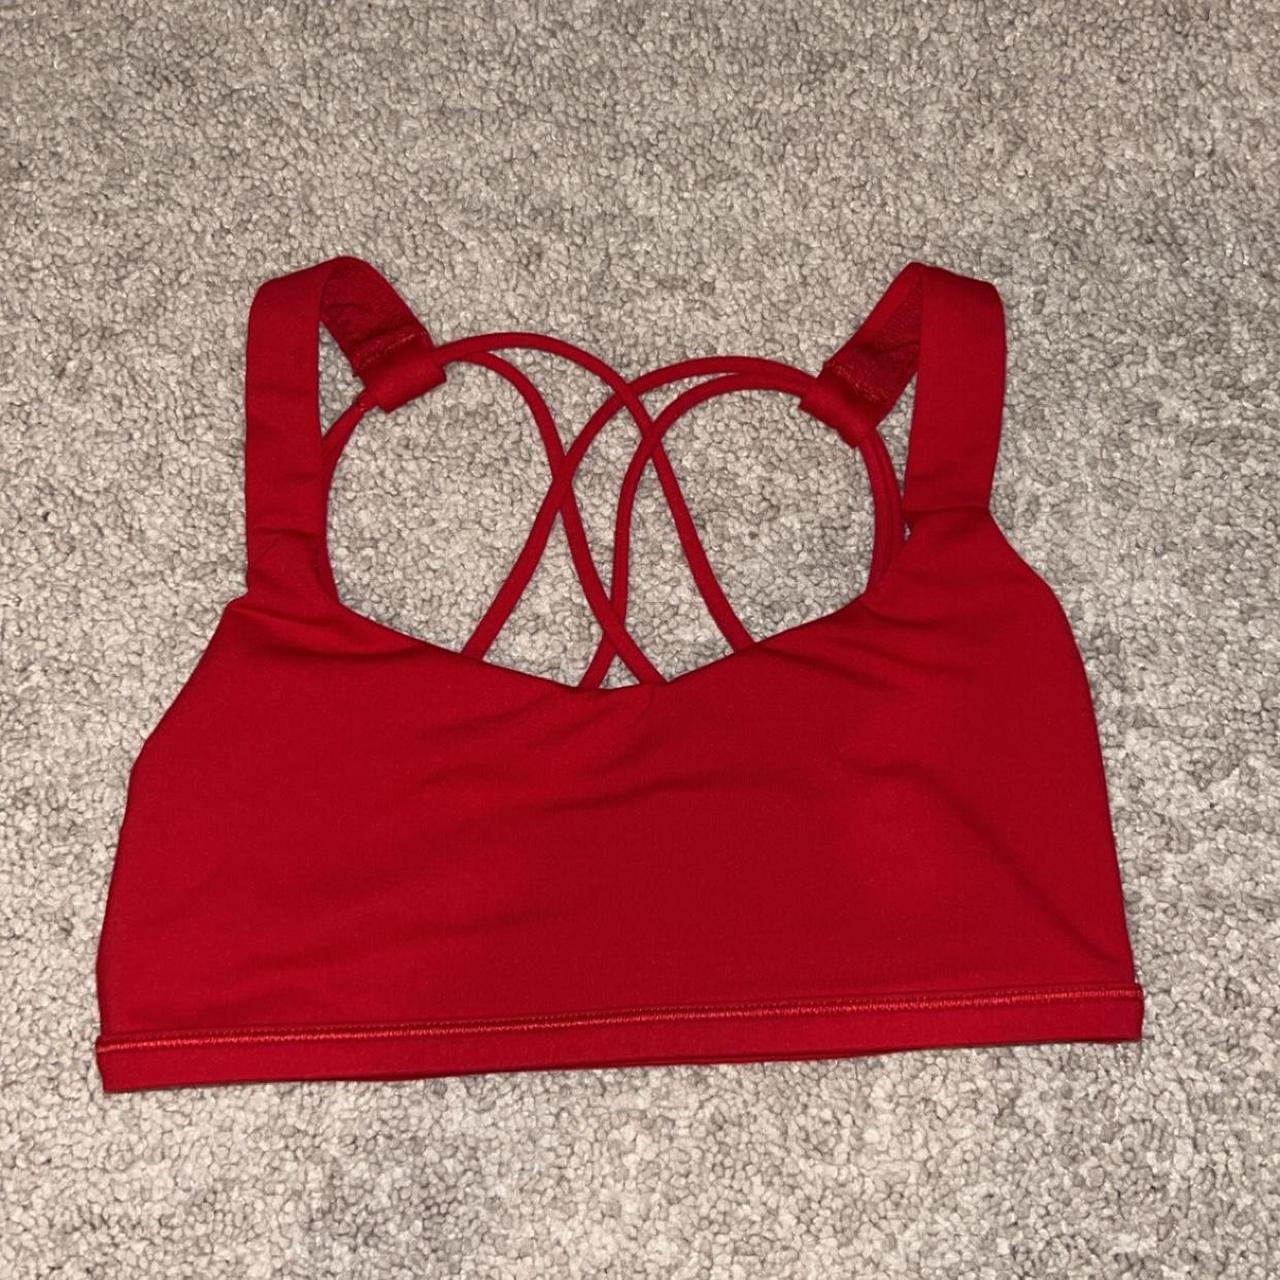 Lululemon Free to be Bra Great condition No... - Depop